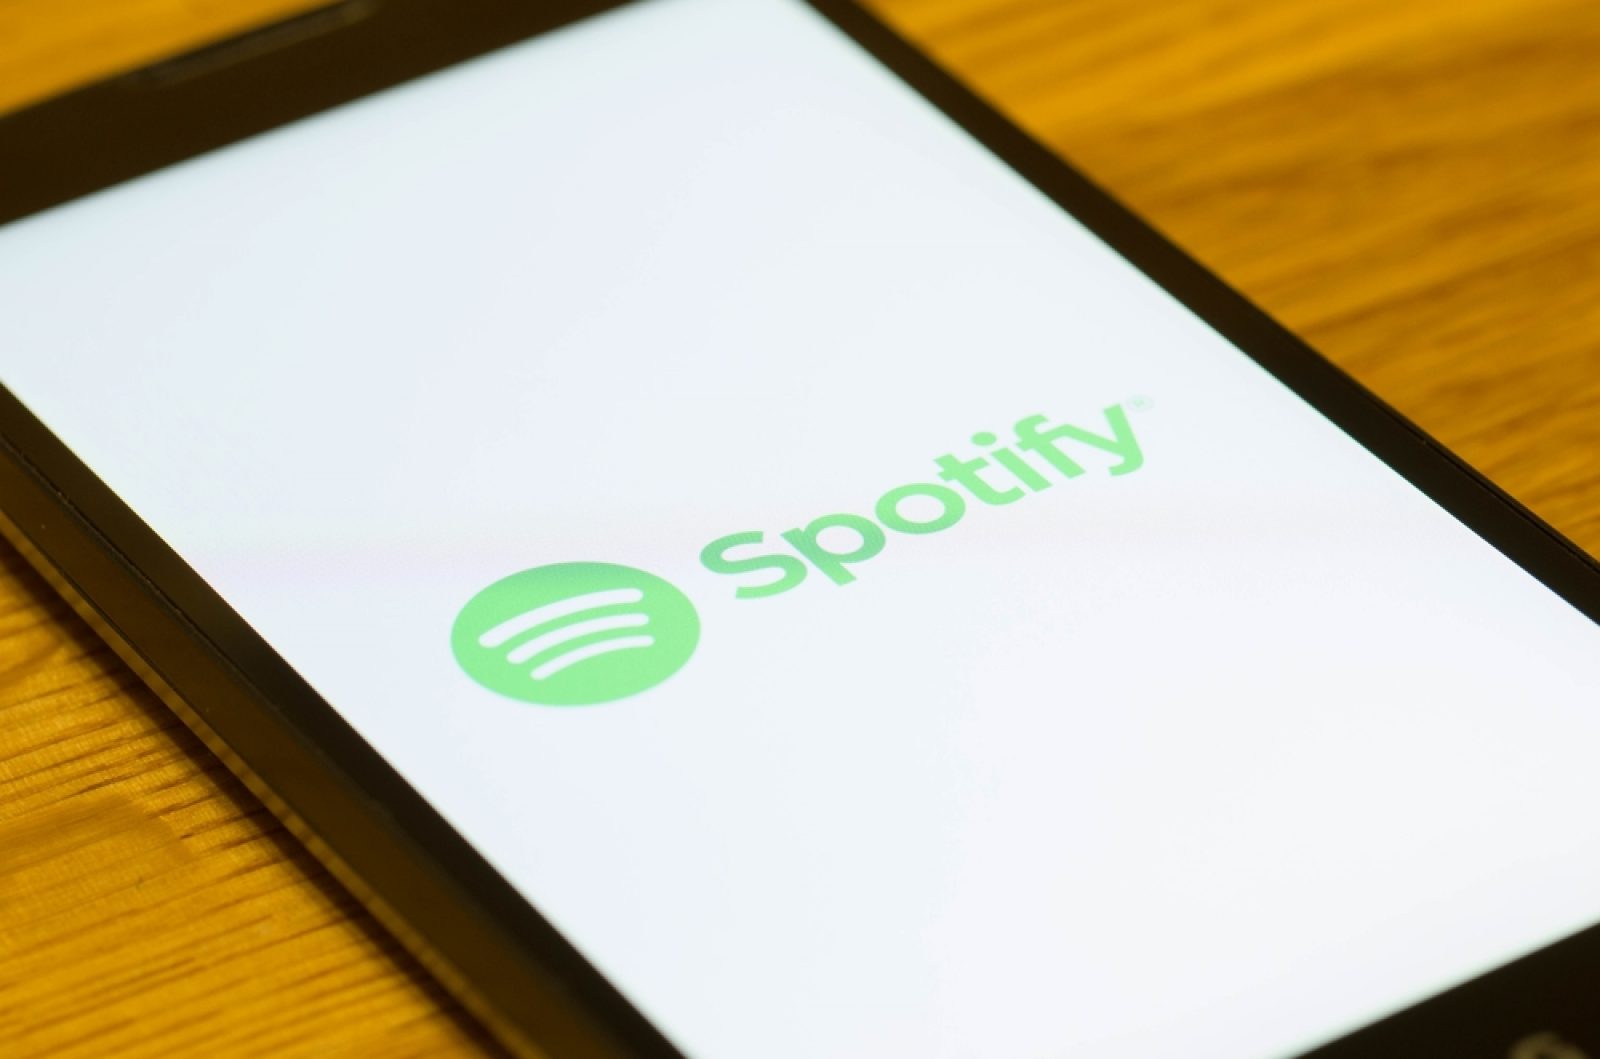 Spotify Sees Strong Growth as Paid Subscriptions and Profits Rise